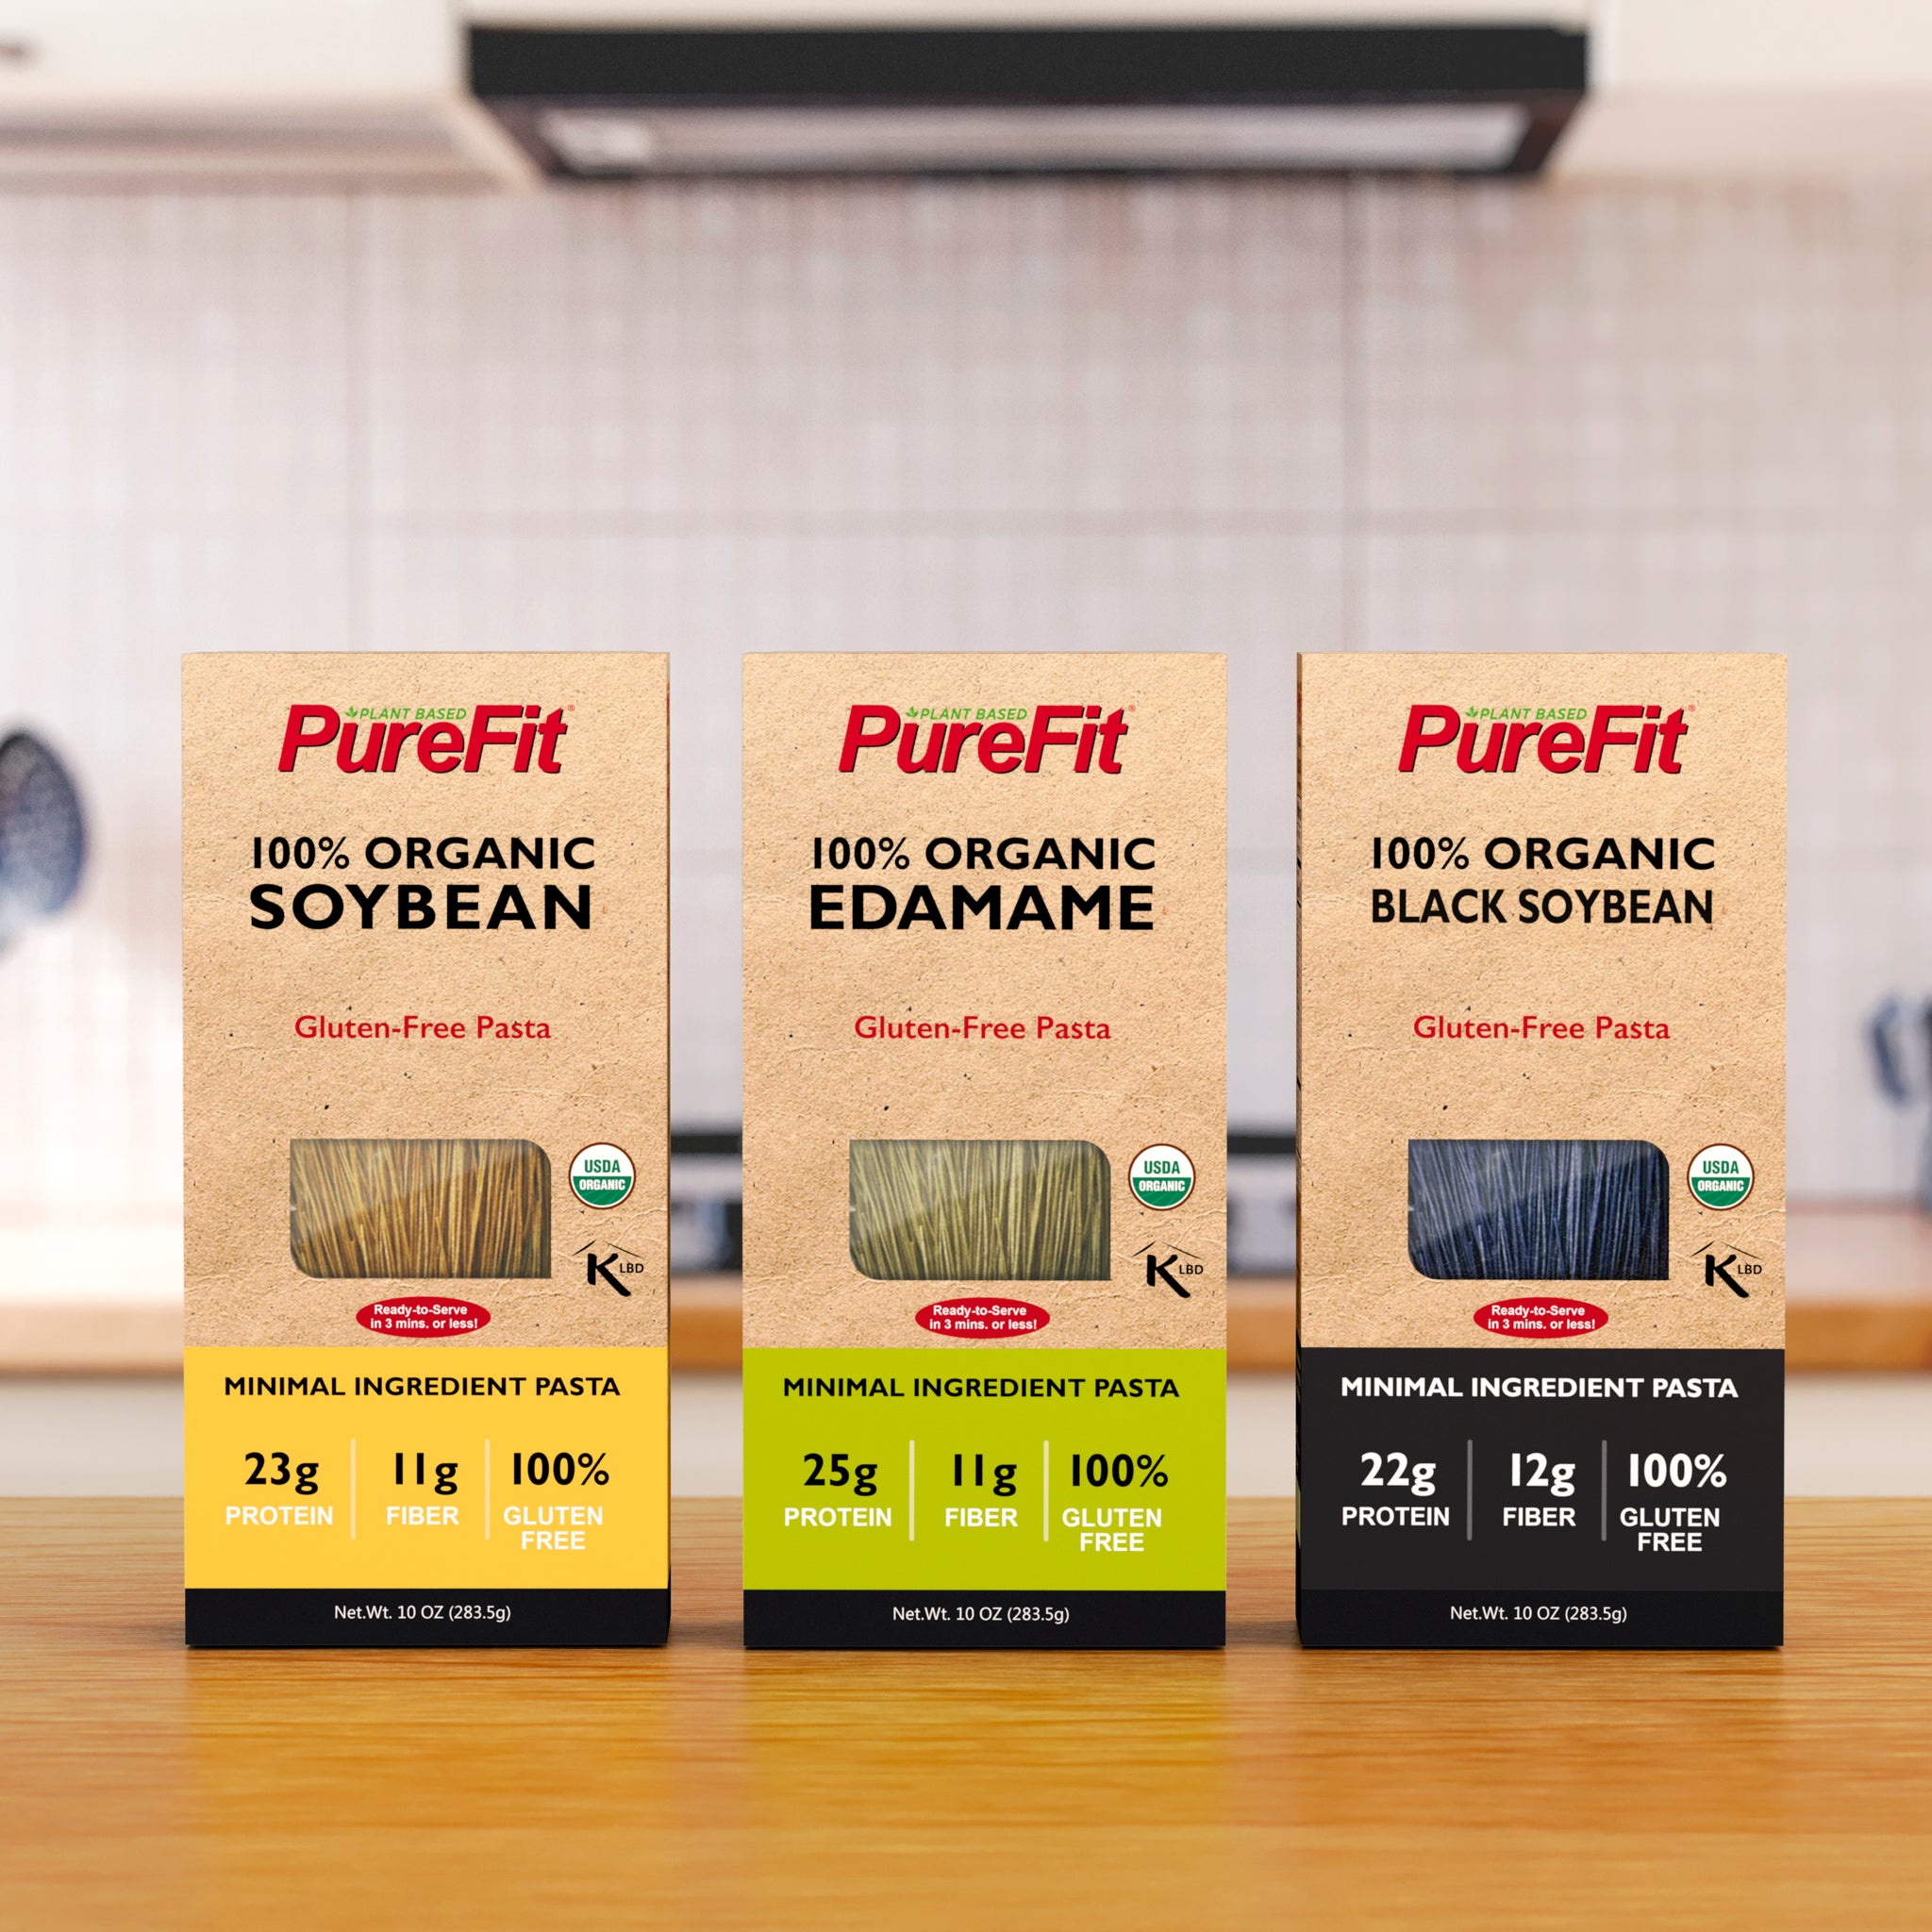 PureFit launches 3 organic, great-tasting plant-based pastas packed with protein!